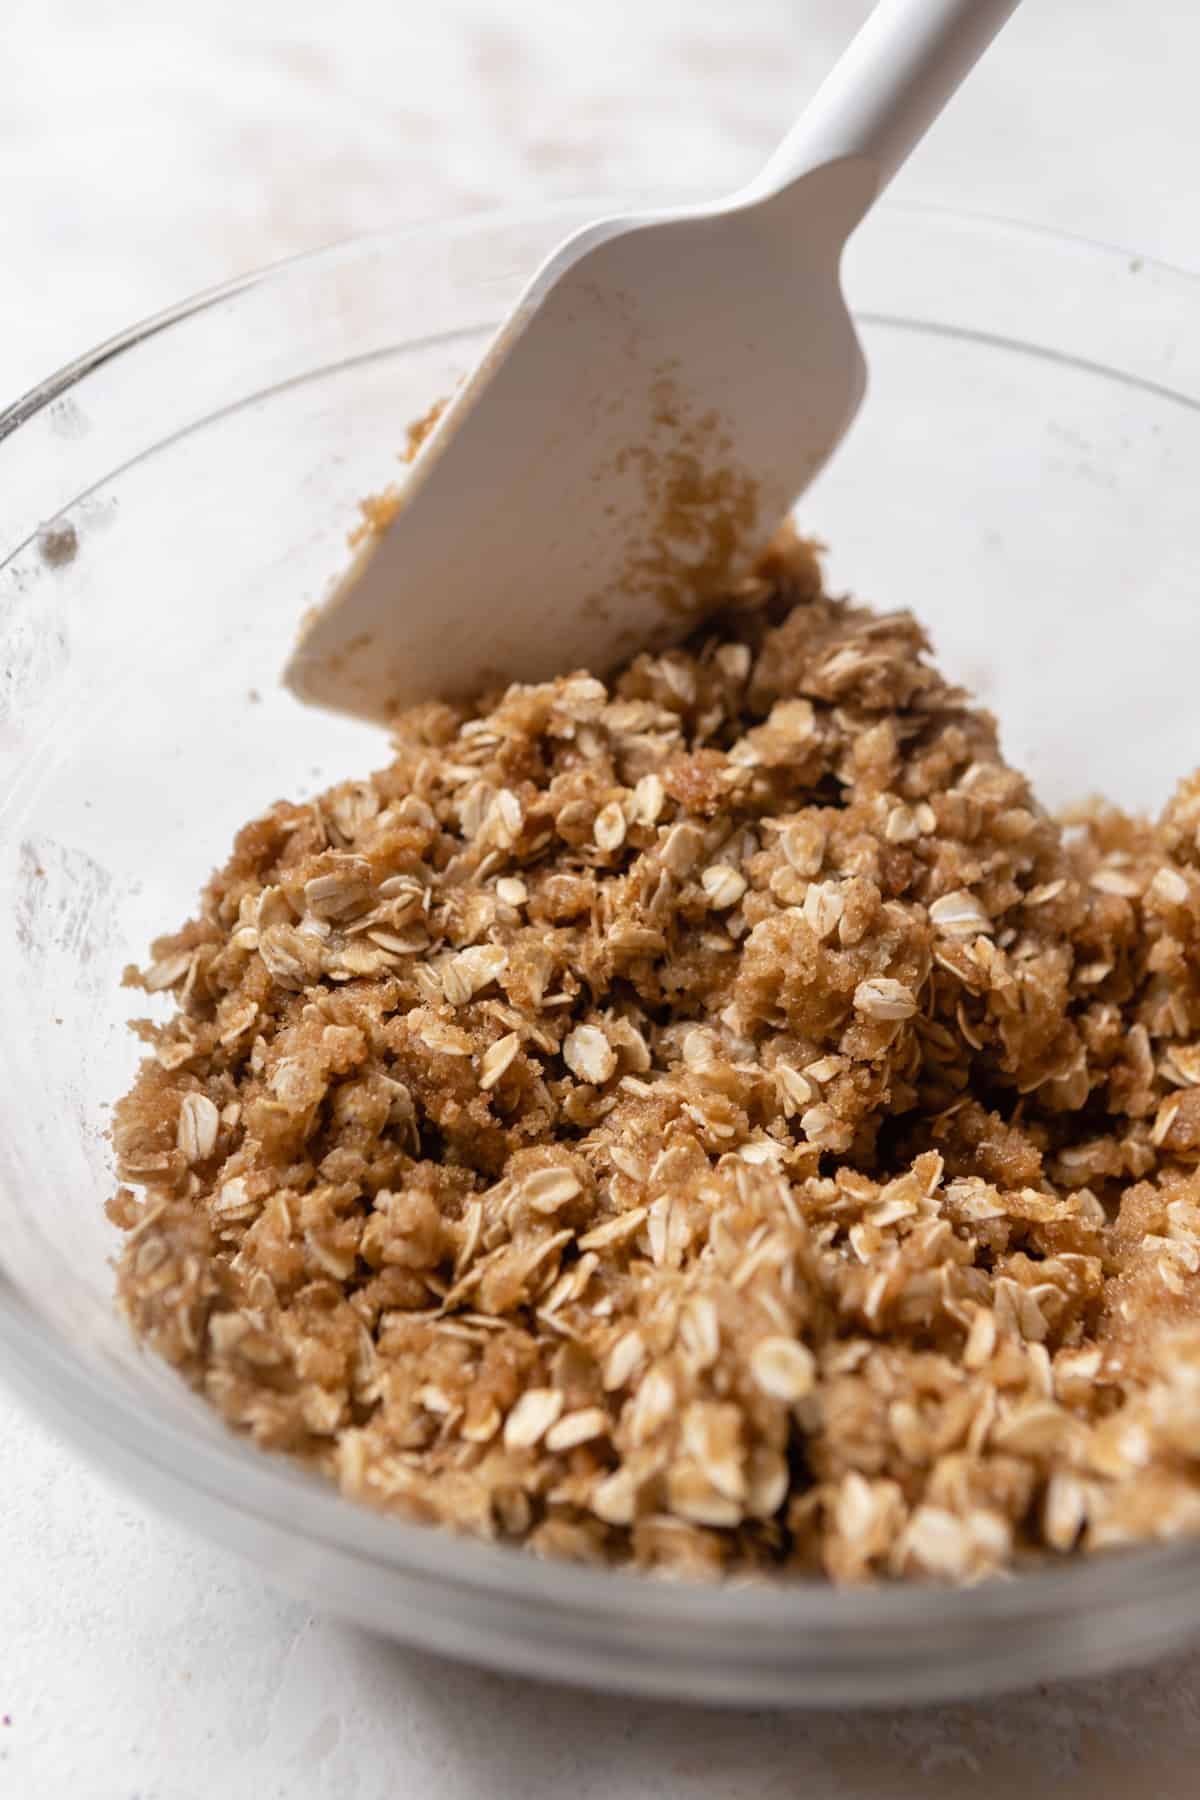 A crumble topping with oats being mixed in a bowl.